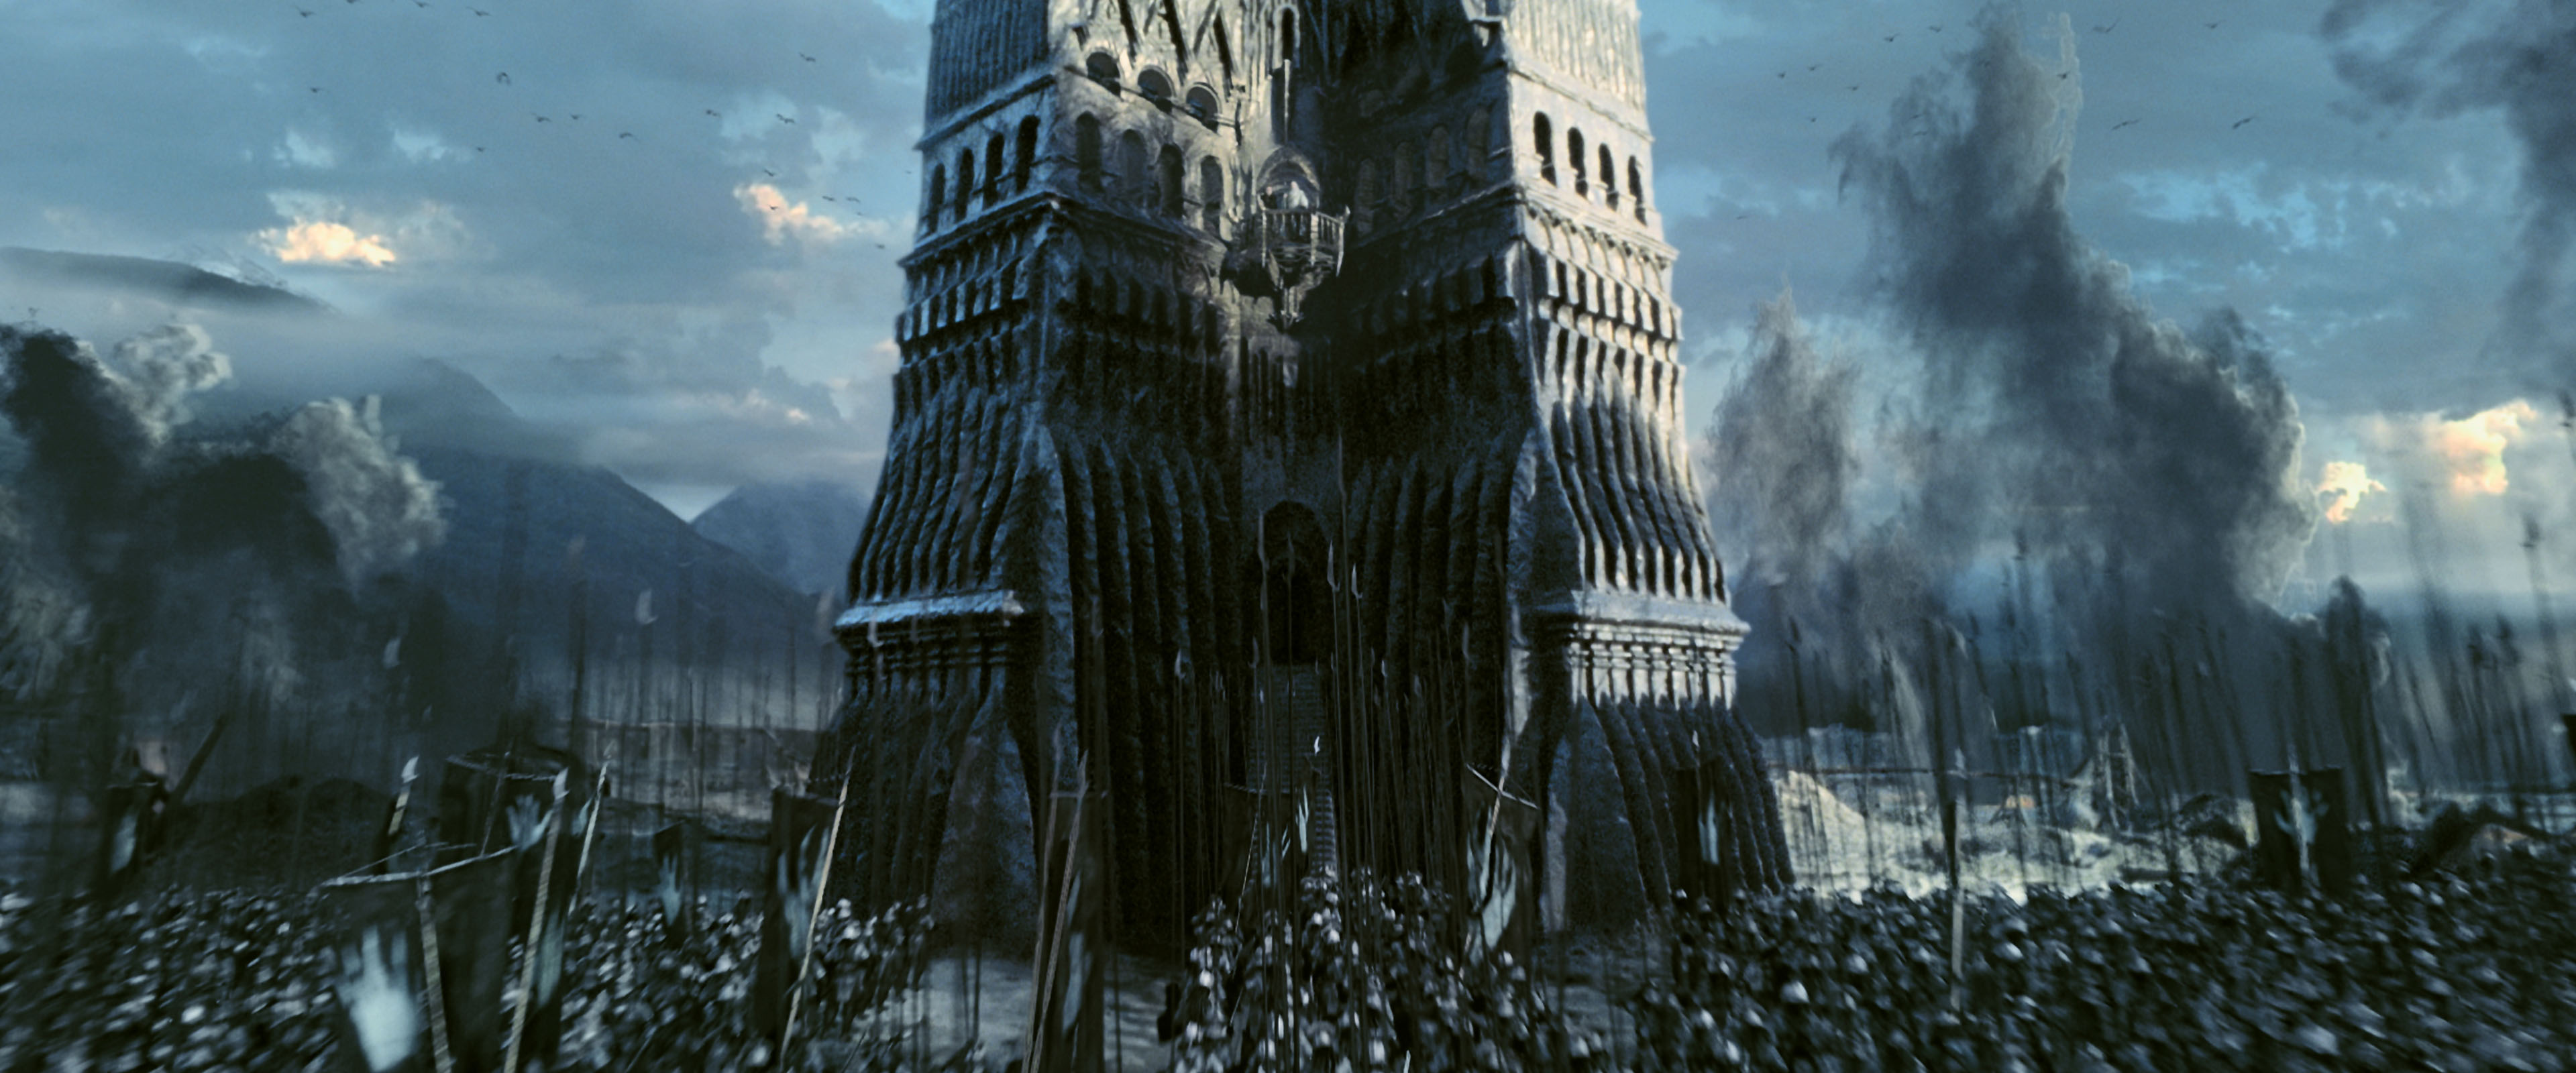 The Lord of the Rings: The Two Towers Showtimes